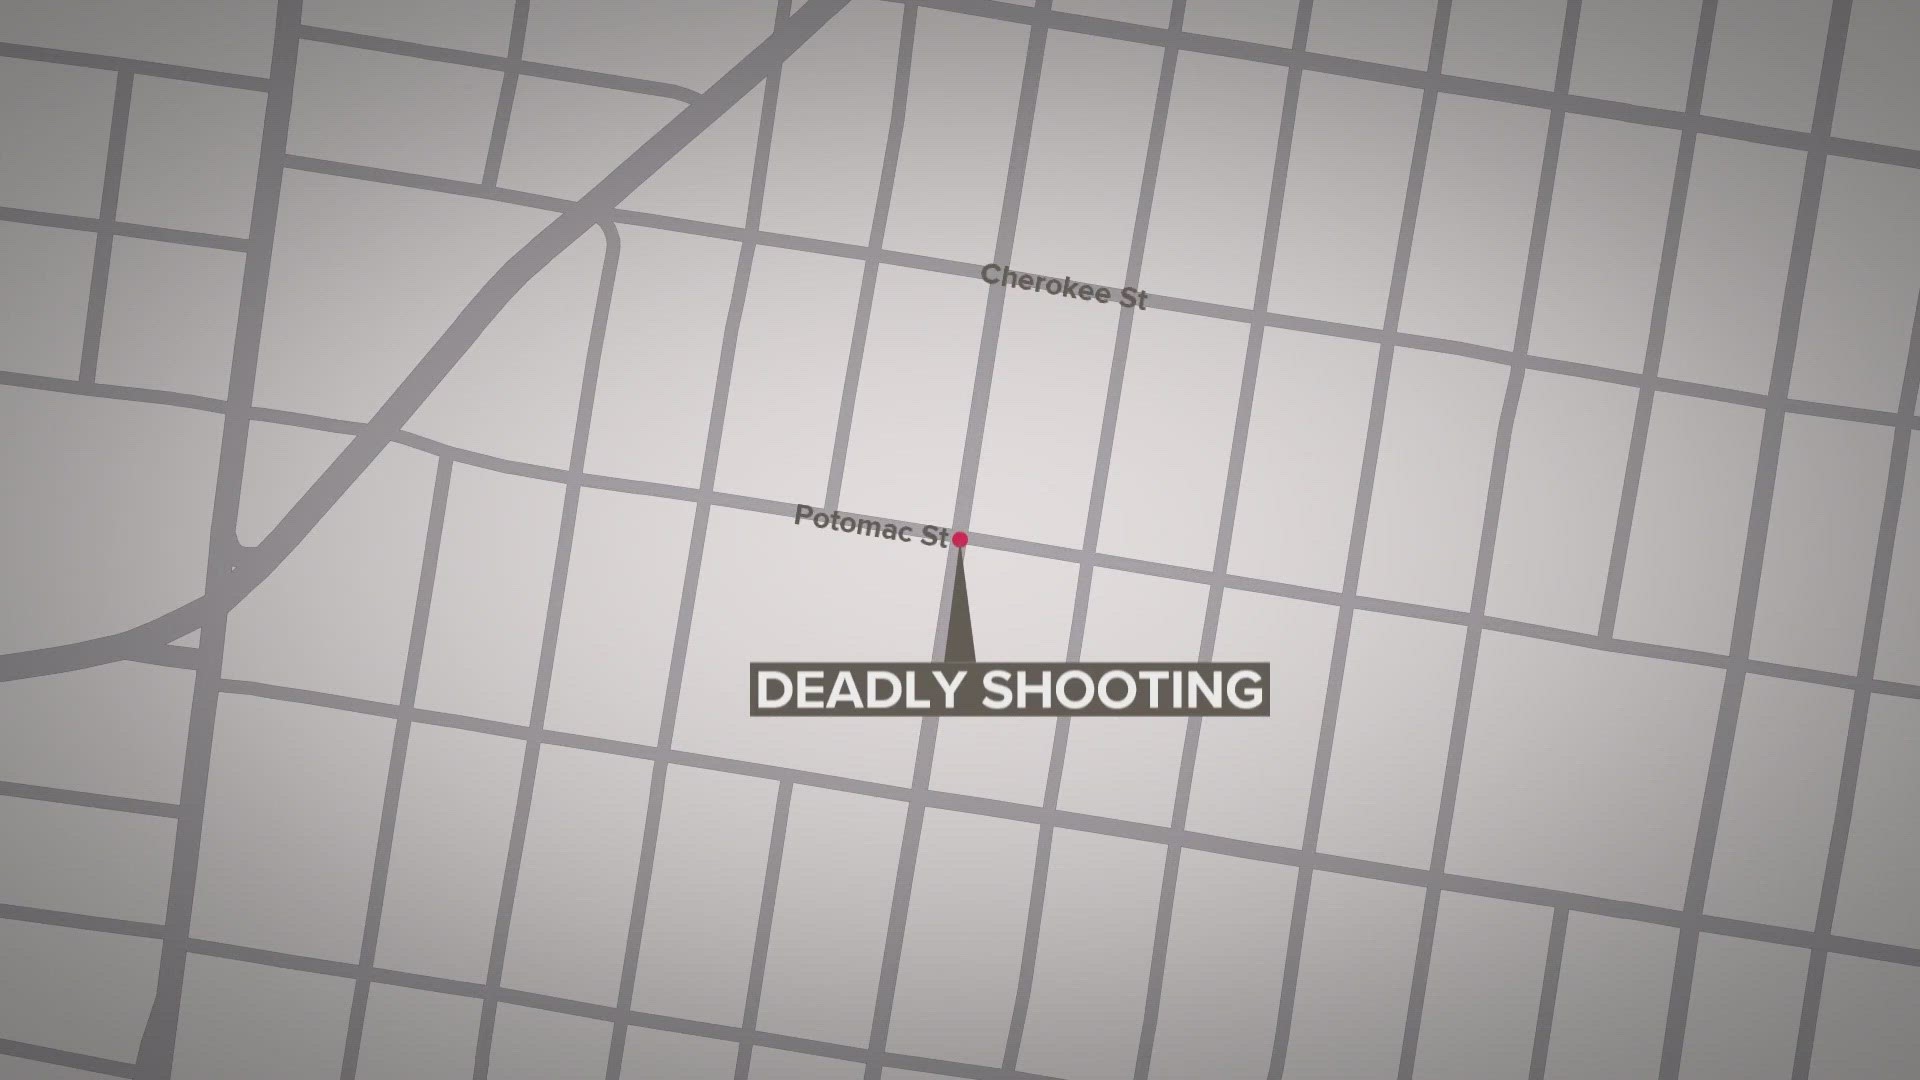 Police said a victim was found with a gunshot wound to his head just after 3:30 a.m. in the area of South Compton Avenue and Potomac Street. He wasn't breathing.